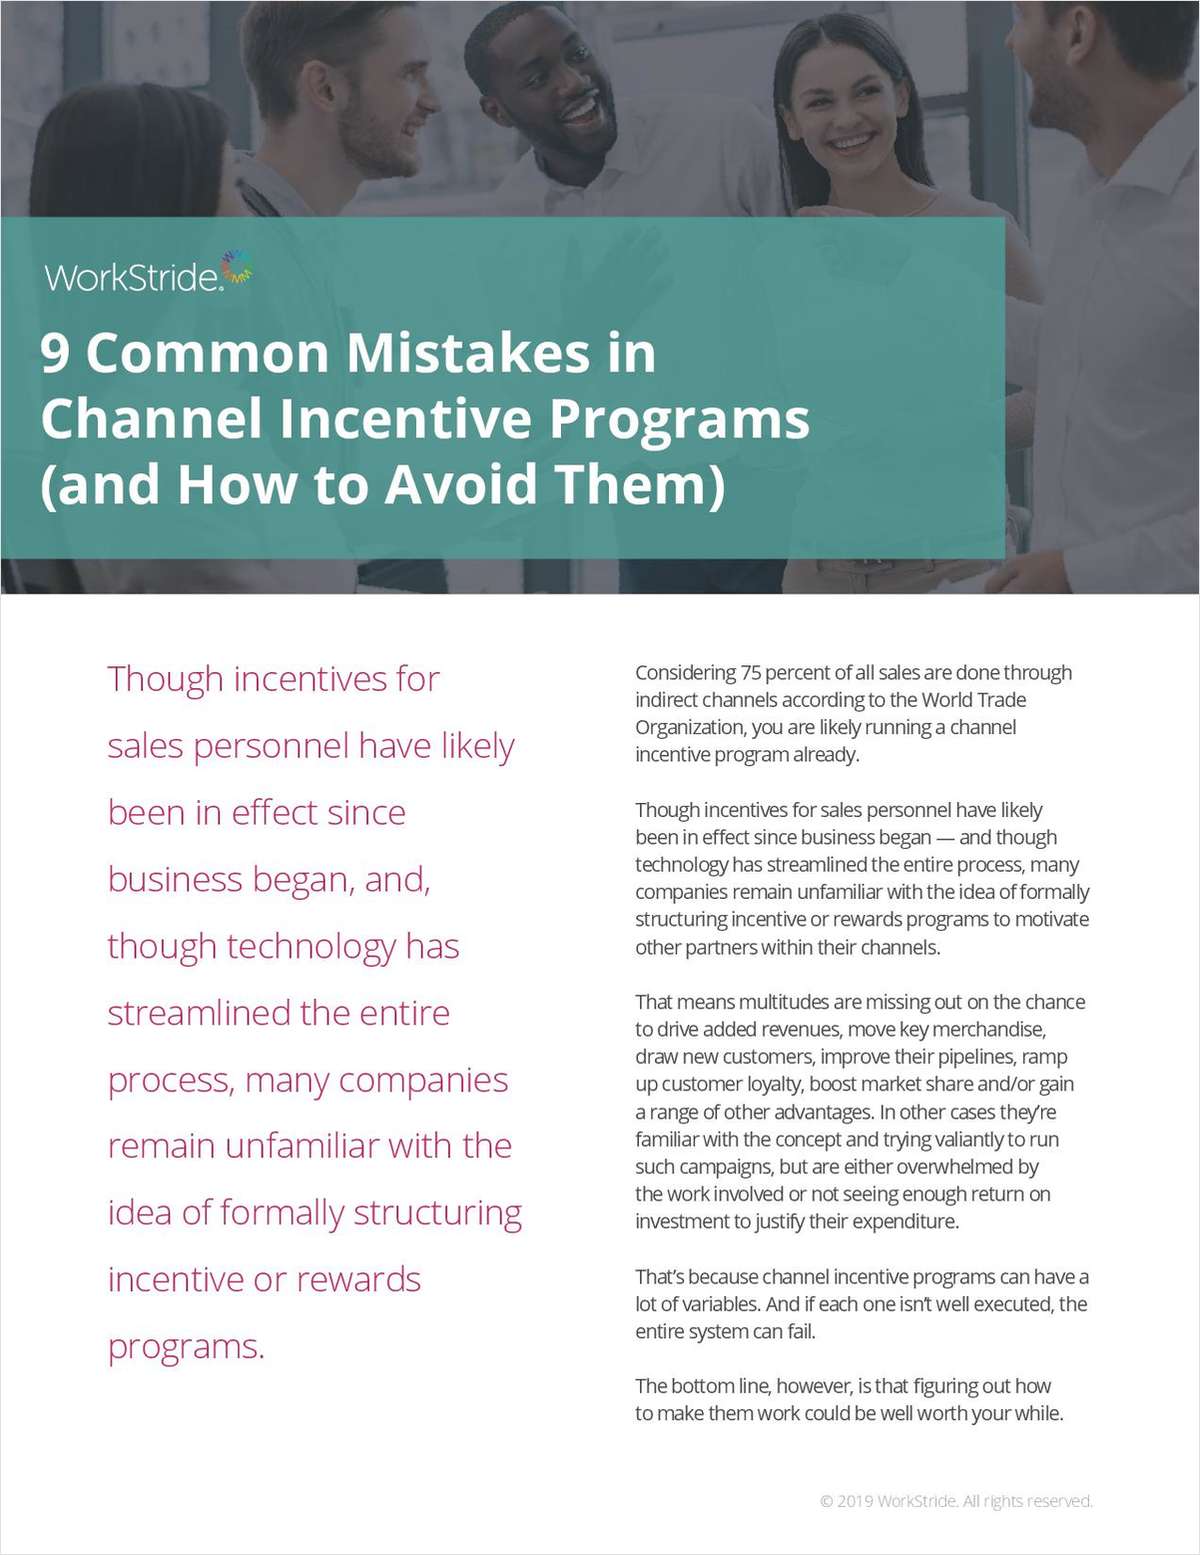 9 Common Mistakes in Channel Incentive Programs (and How to Avoid Them)